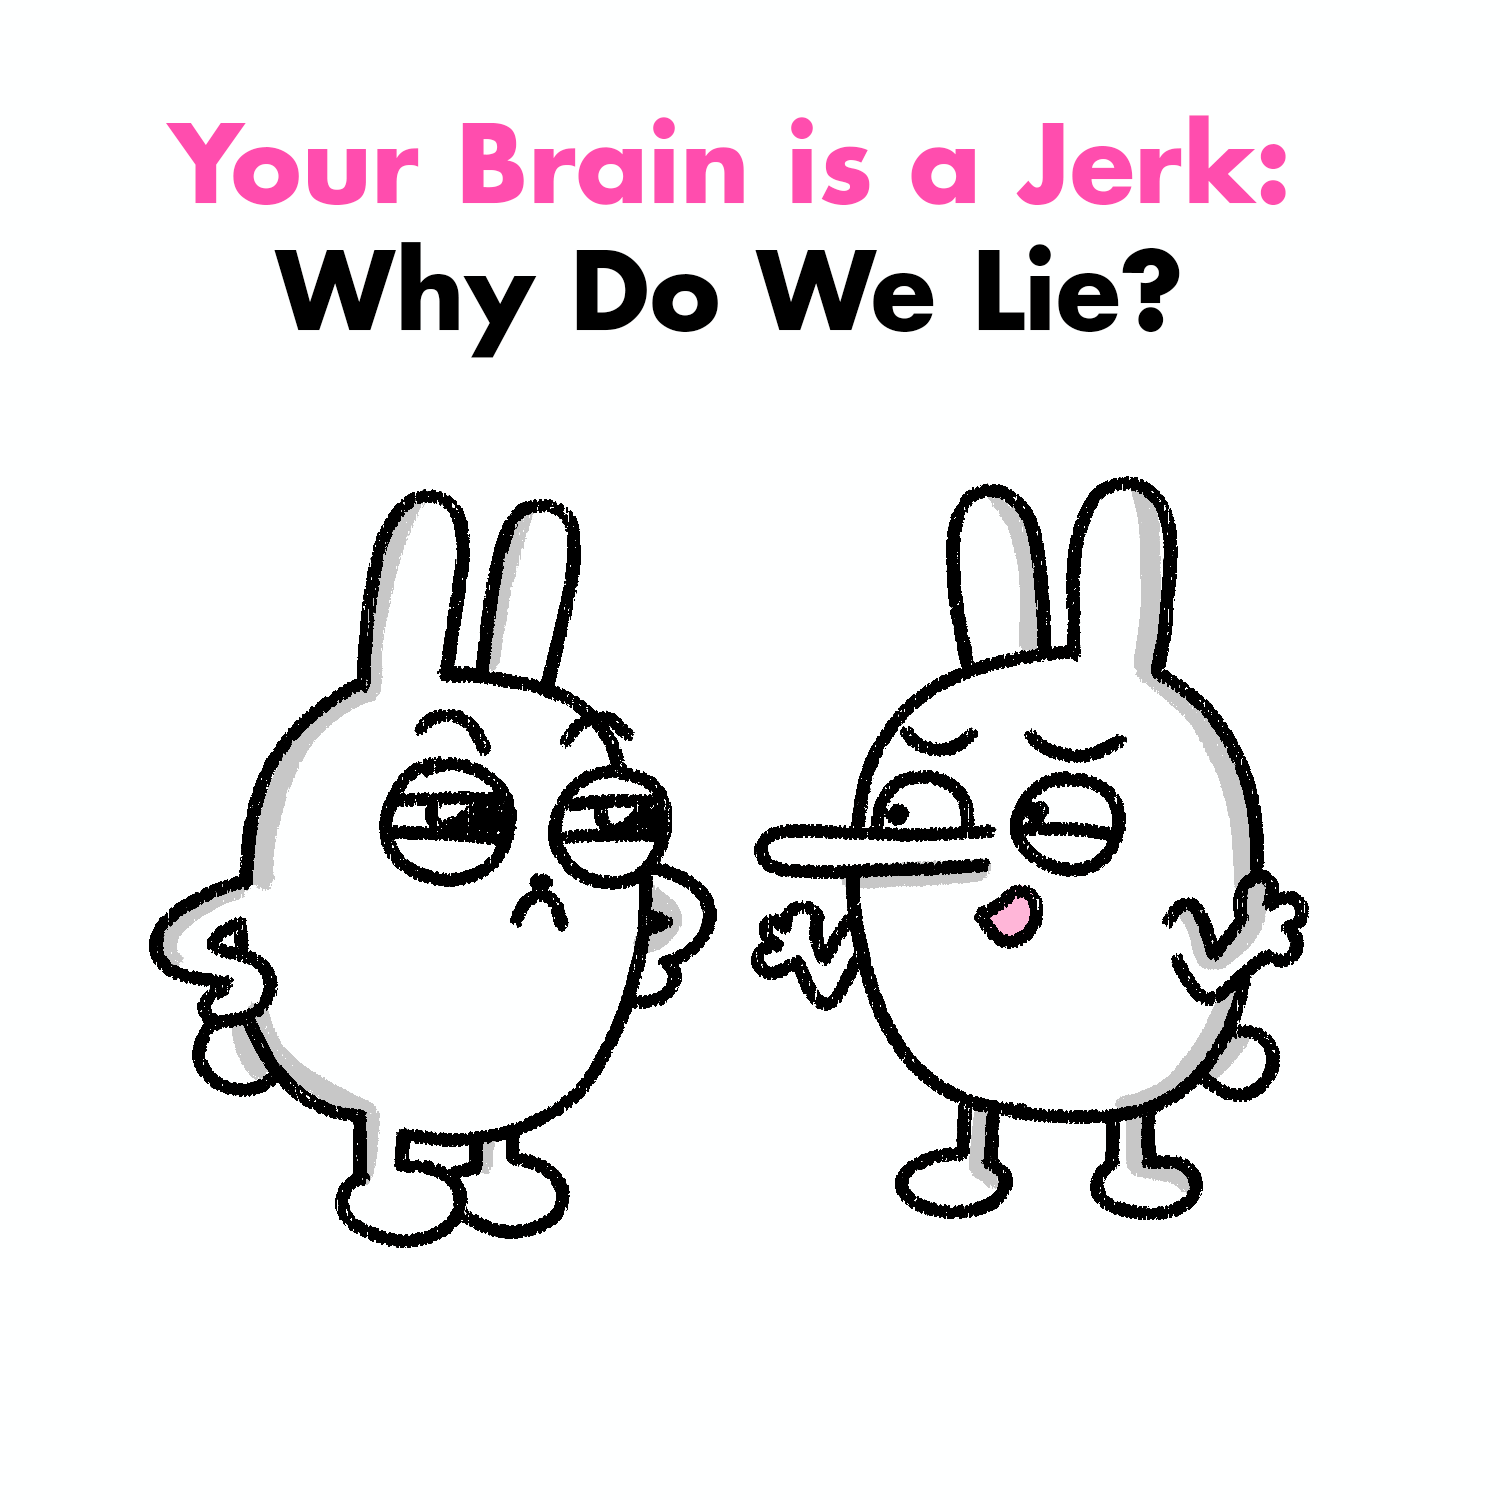 Your Brain is a Jerk: Why Do We Lie?